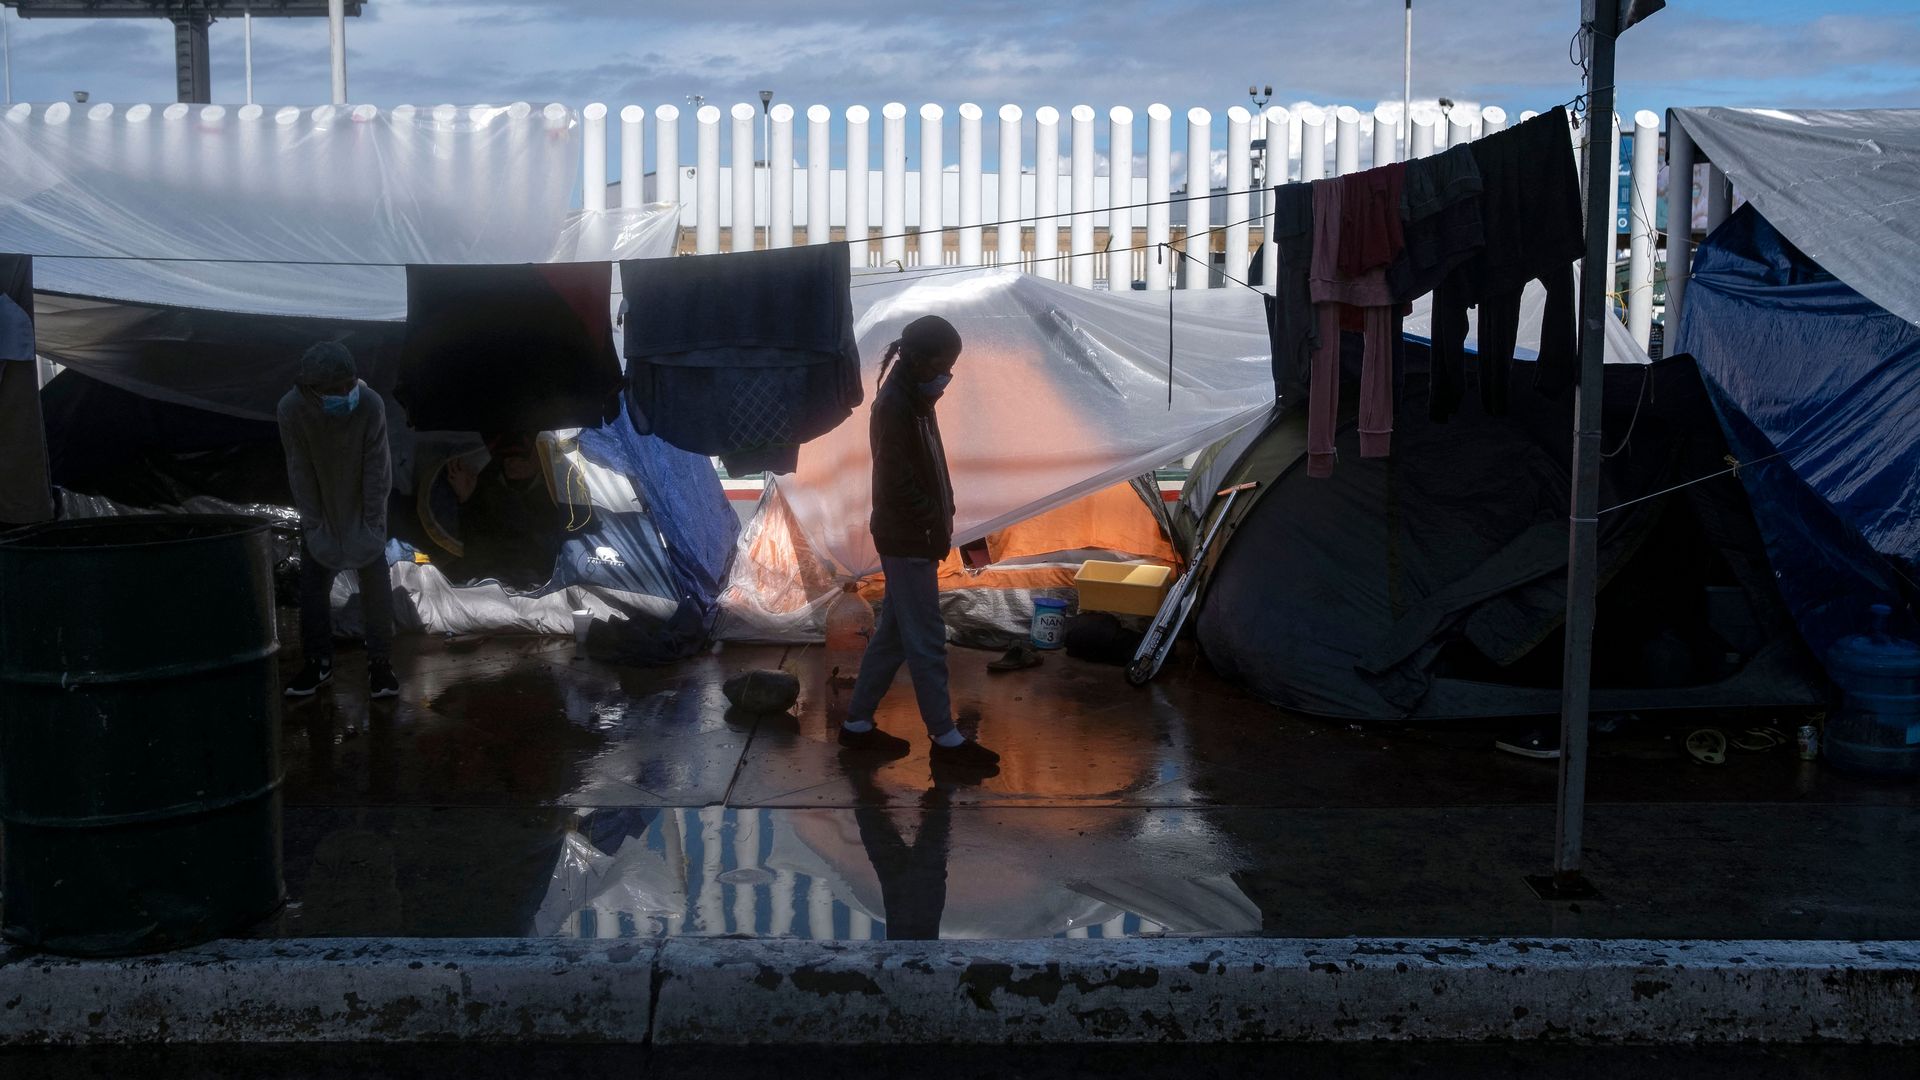 A migrant girl walks at an improvised camp outside El Chaparral crossing port in Tijuana, Baja California state, Mexico, on March 11